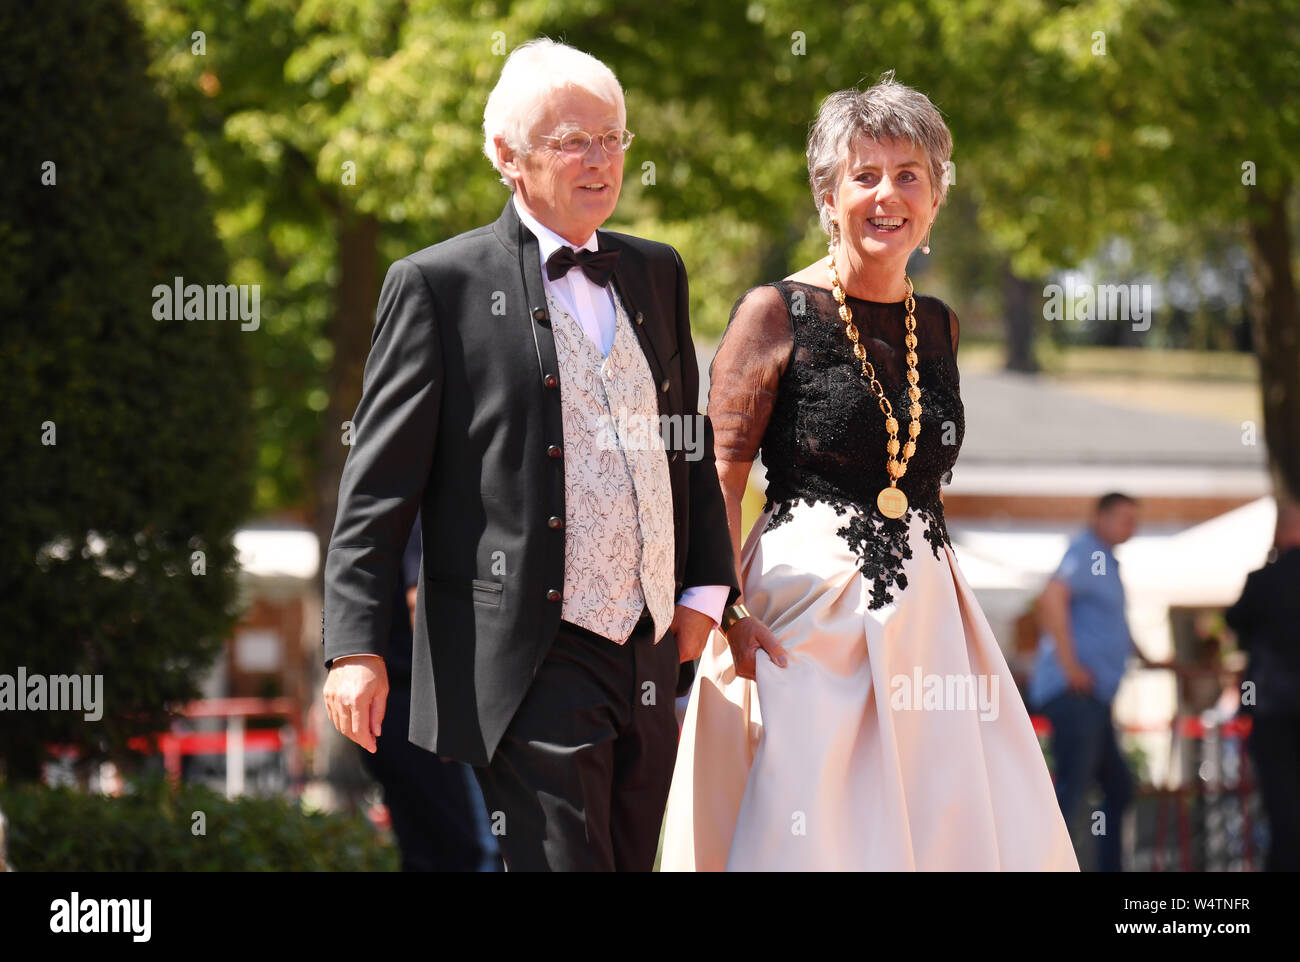 Bayreuth, Germany. 25th July, 2019. The Lord Mayor of Bayreuth, Brigitte Merk-Erbe, and her husband Thomas are coming to the beginning of the Bayreuth Festival 2019. The Richard Wagner Festival will begin in Bayreuth on Thursday. Numerous celebrities are expected on the red carpet. (To dpa 'Bayreuth Festival start in heat with new 'Tannhäuser'') Credit: Tobias Hase/dpa/Alamy Live News Stock Photo